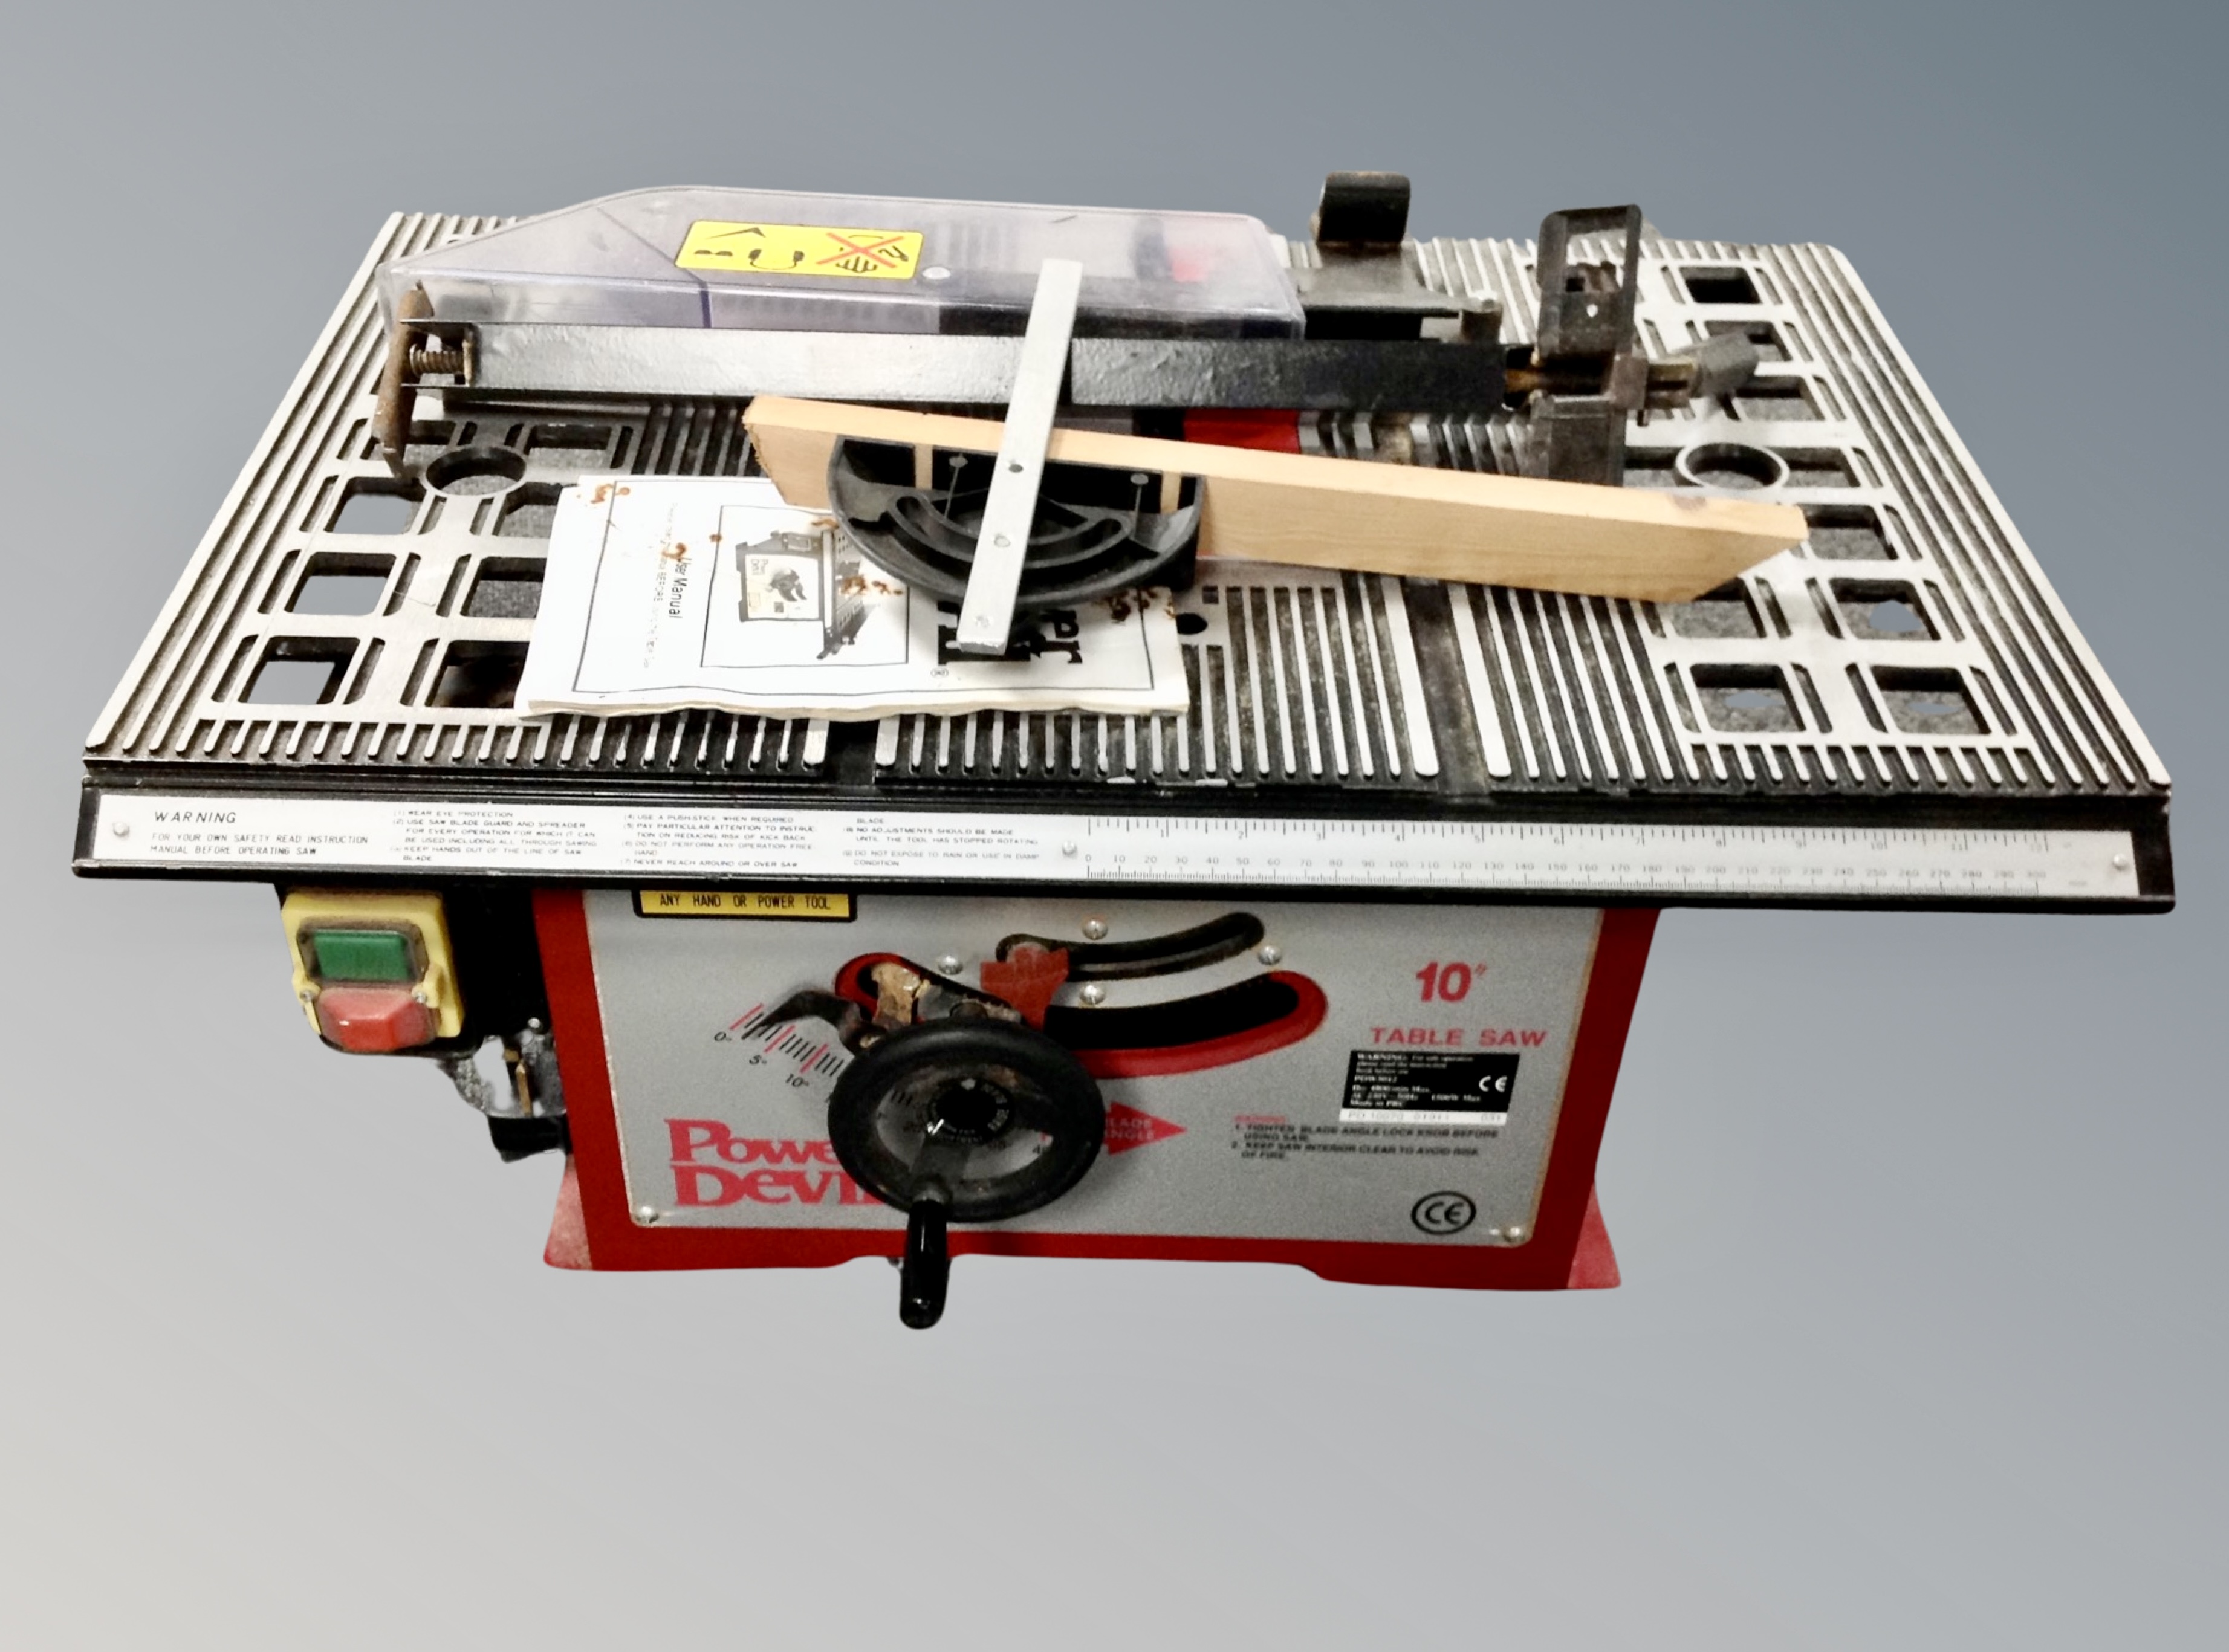 A Power Devil 10" electric table saw